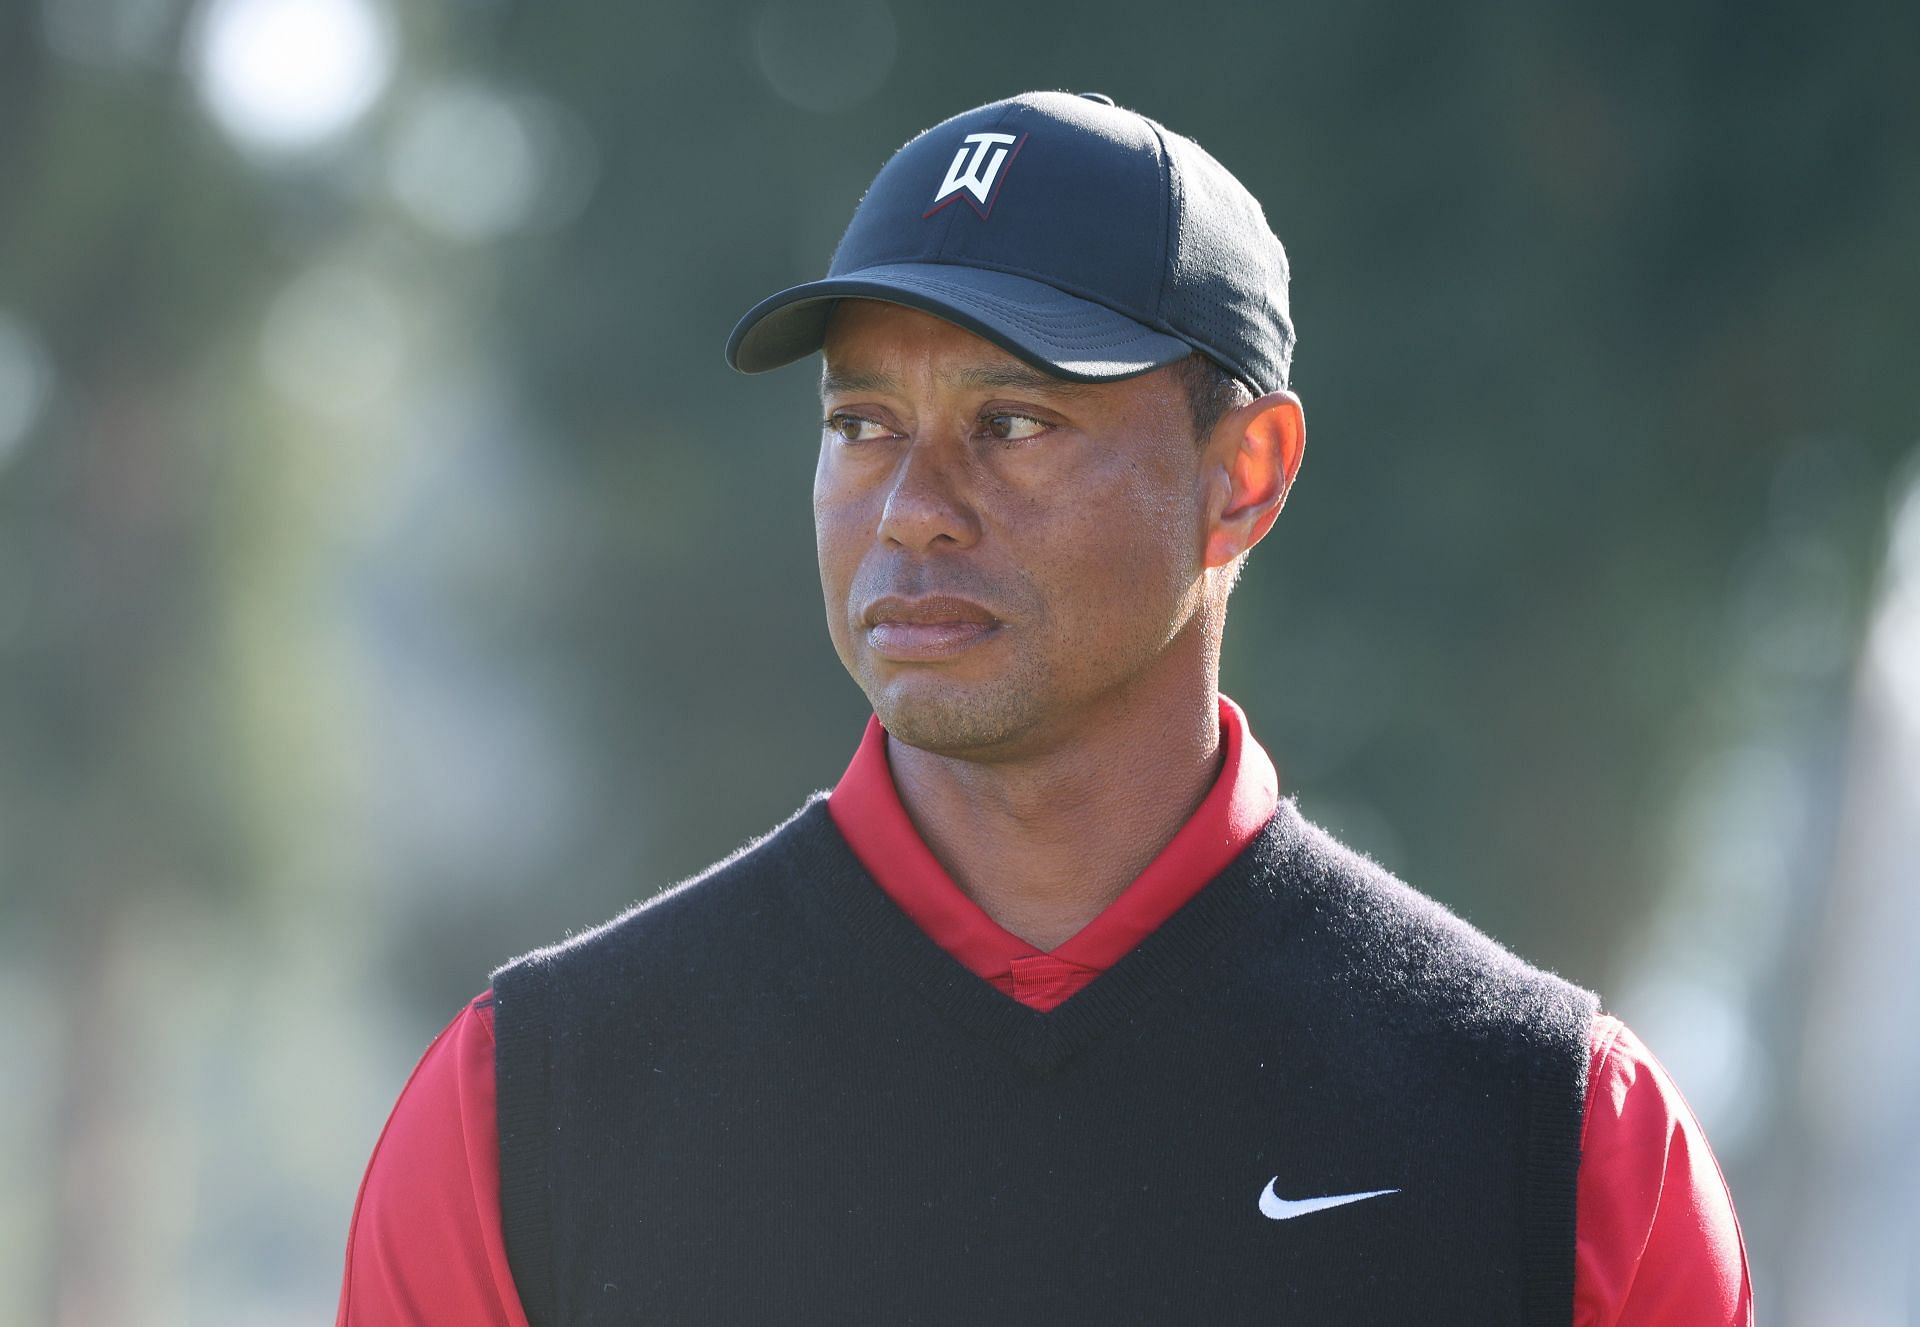 When will Tiger Woods retire?